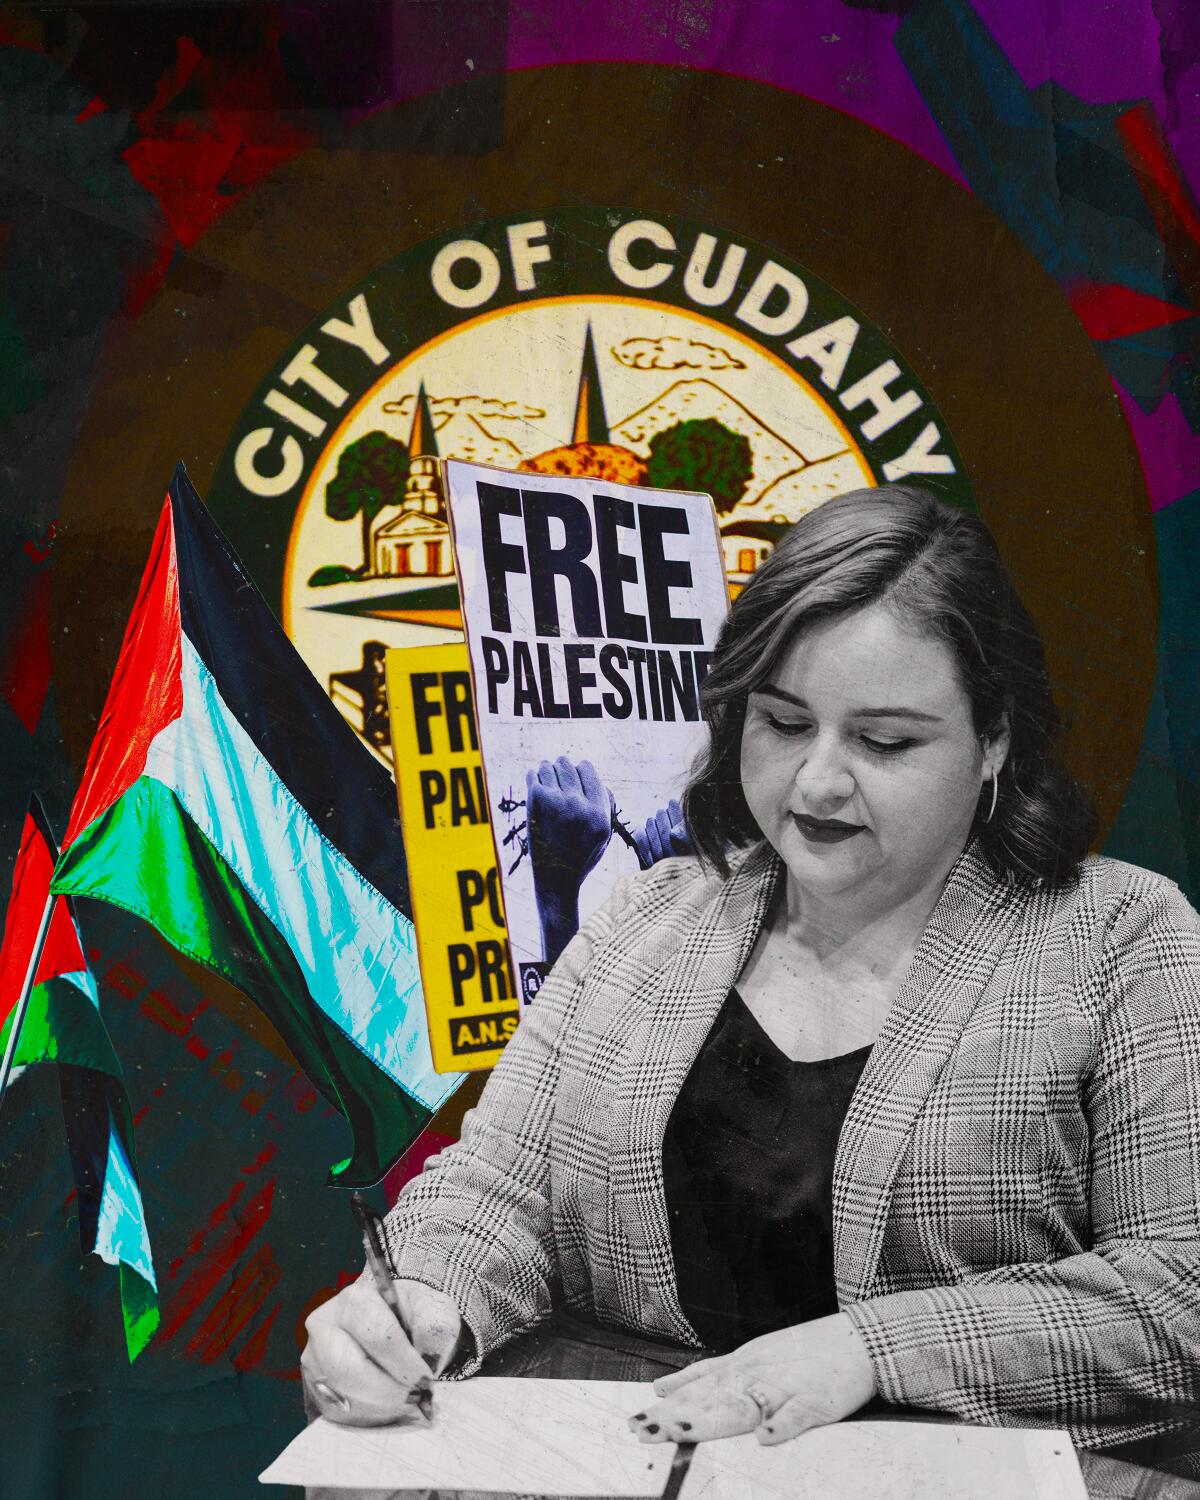 This small, Latino city took a public stance in support of Palestinians. Will others follow?